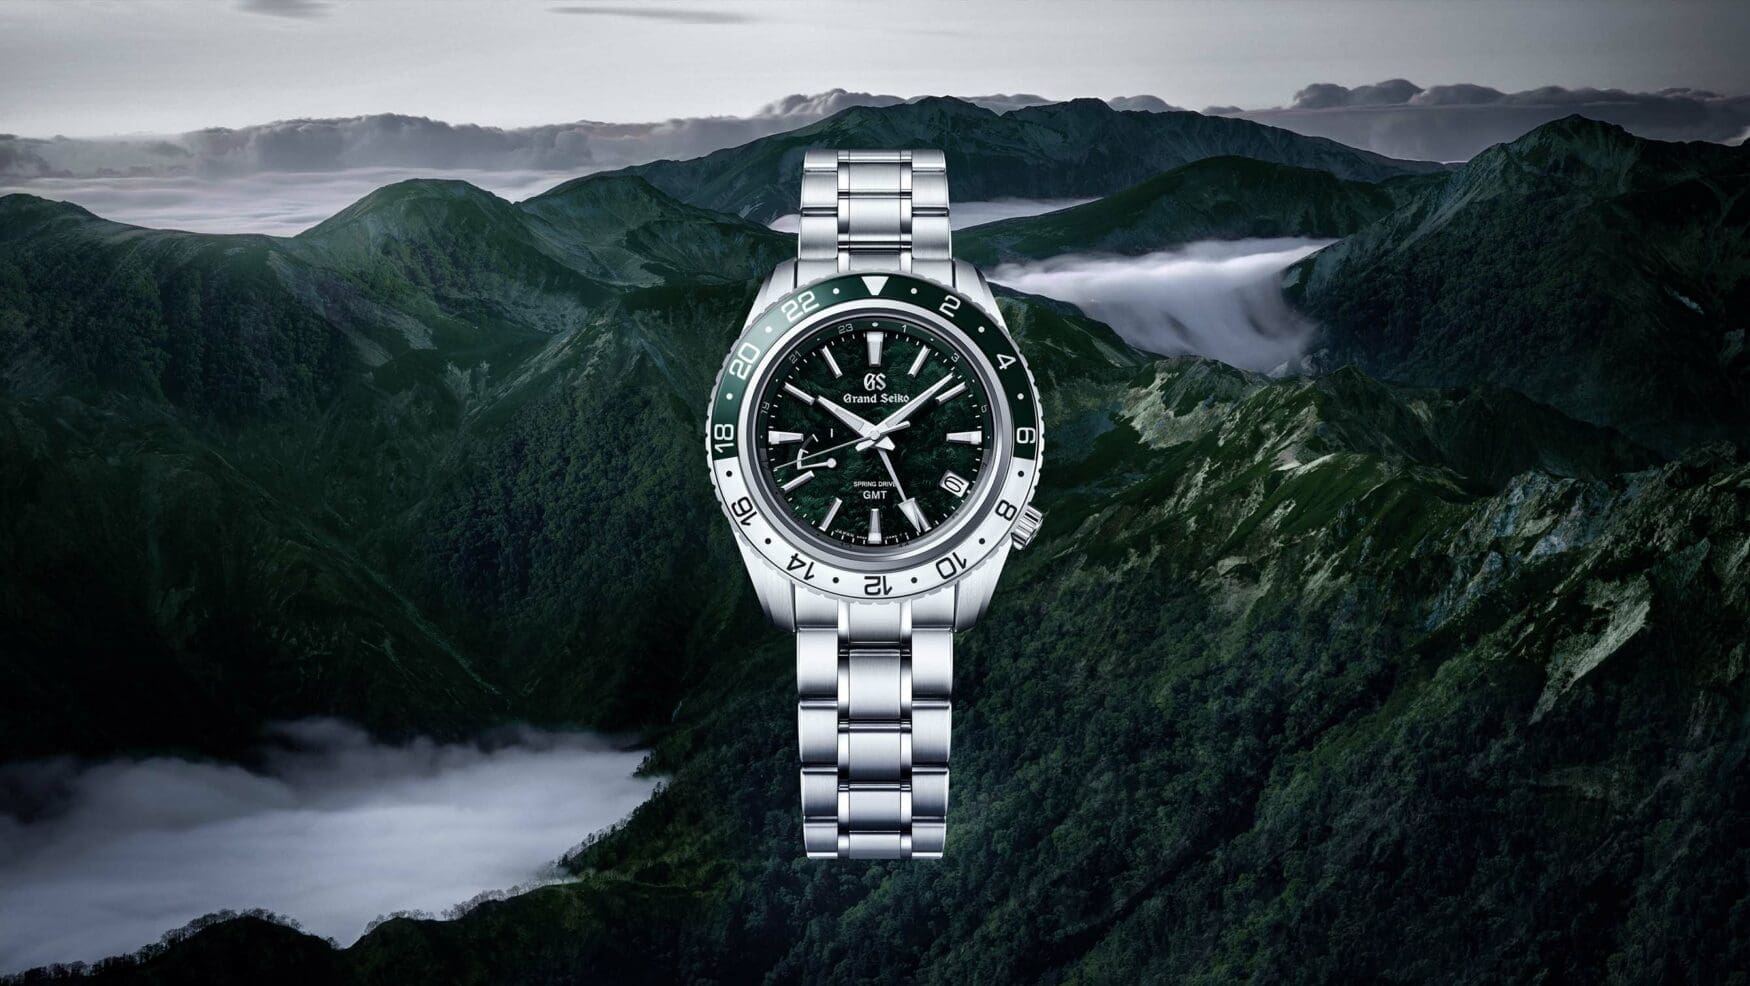 The Grand Seiko SBGE295 “Mt. Hotaka Peaks” GMT is inspired by lush mountain woods